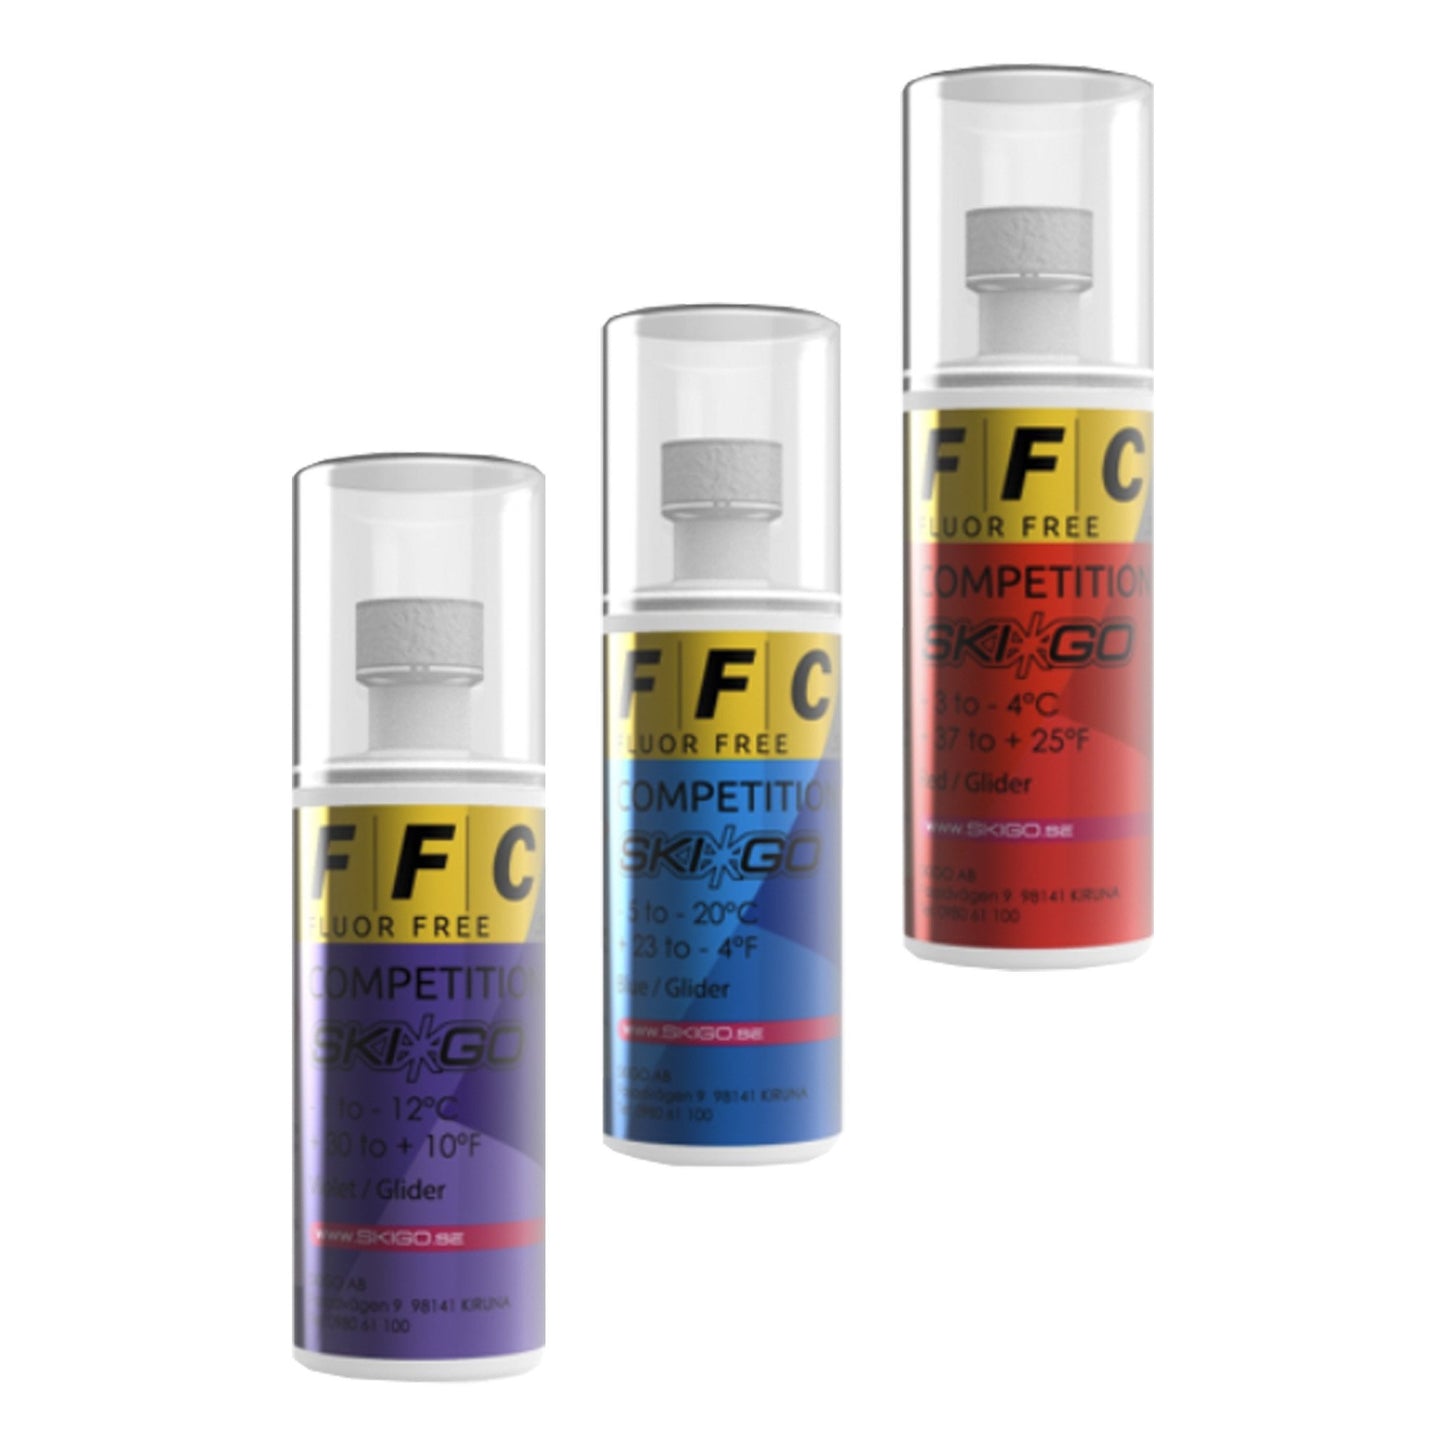 FFC fleeting for competitions (100ml)